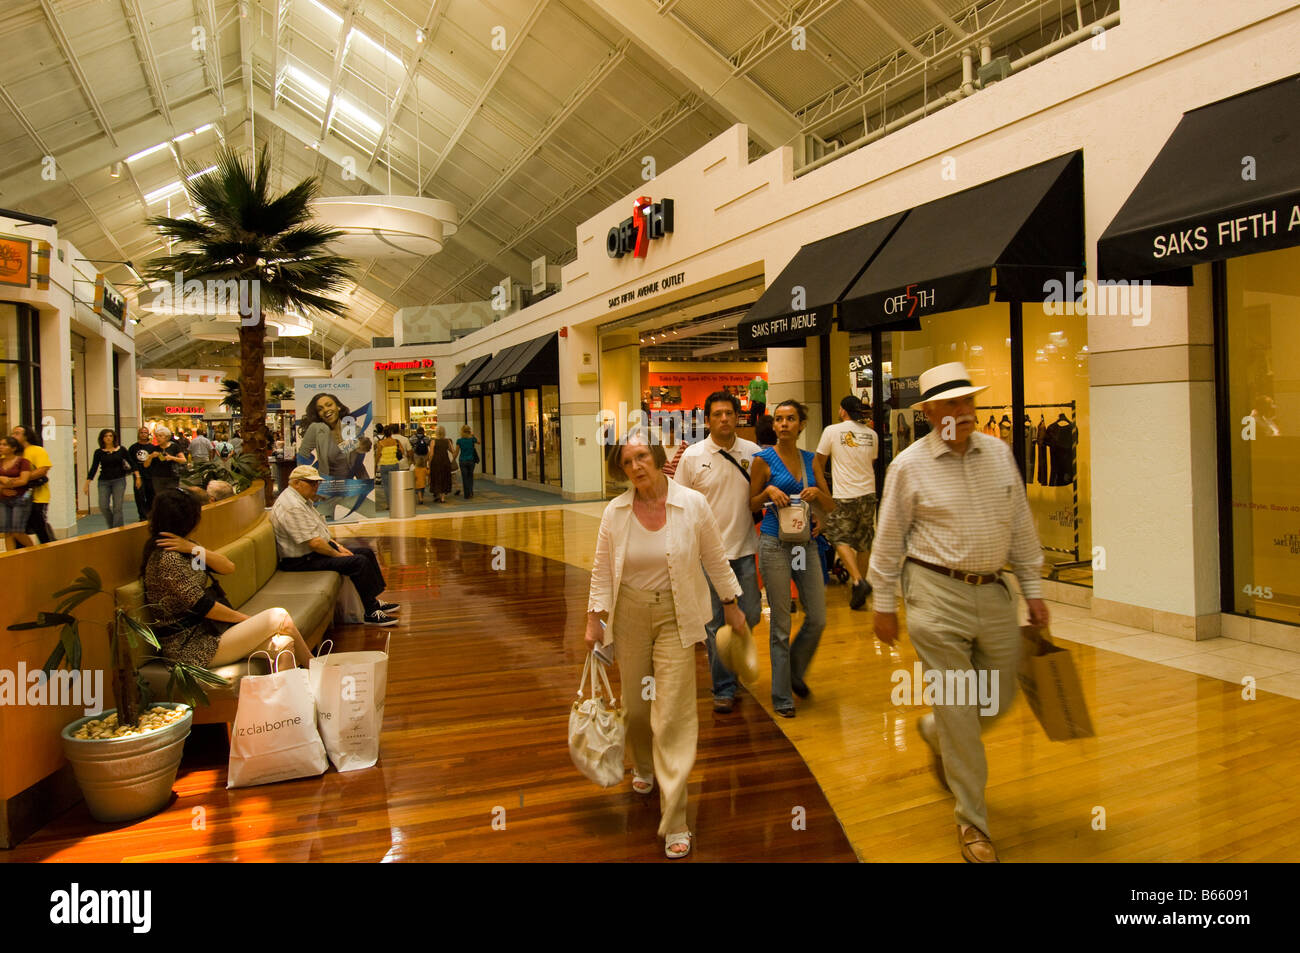 Sawgrass Mills reviews, photos - Out of town - Fort Lauderdale - GayCities  Fort Lauderdale